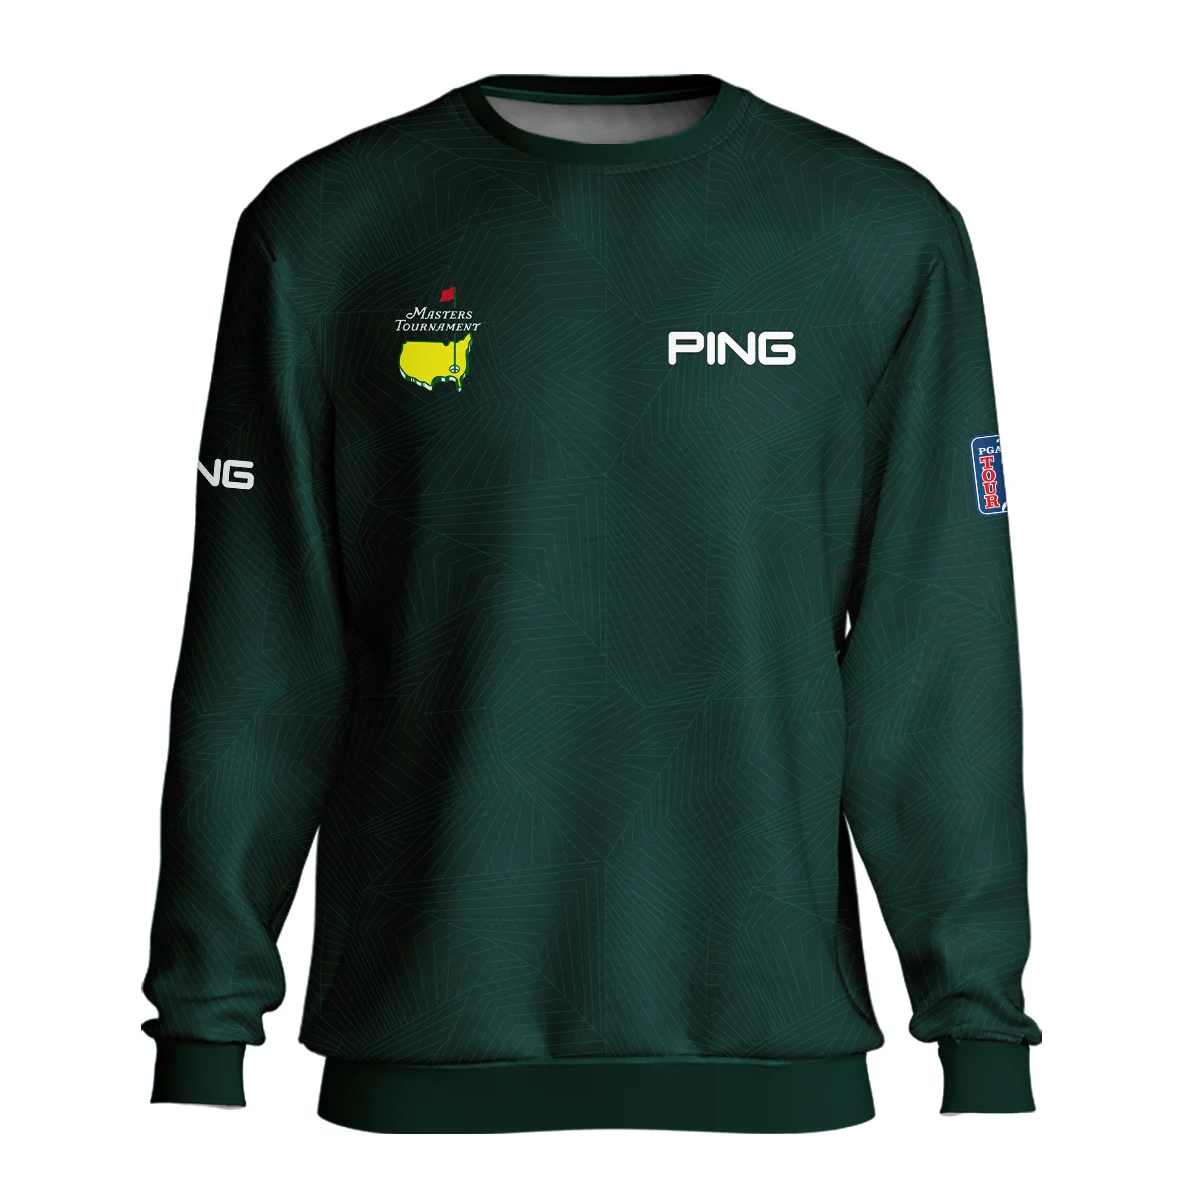 Masters Tournament Ping Pattern Sport Jersey Dark Green Bomber Jacket Style Classic Bomber Jacket